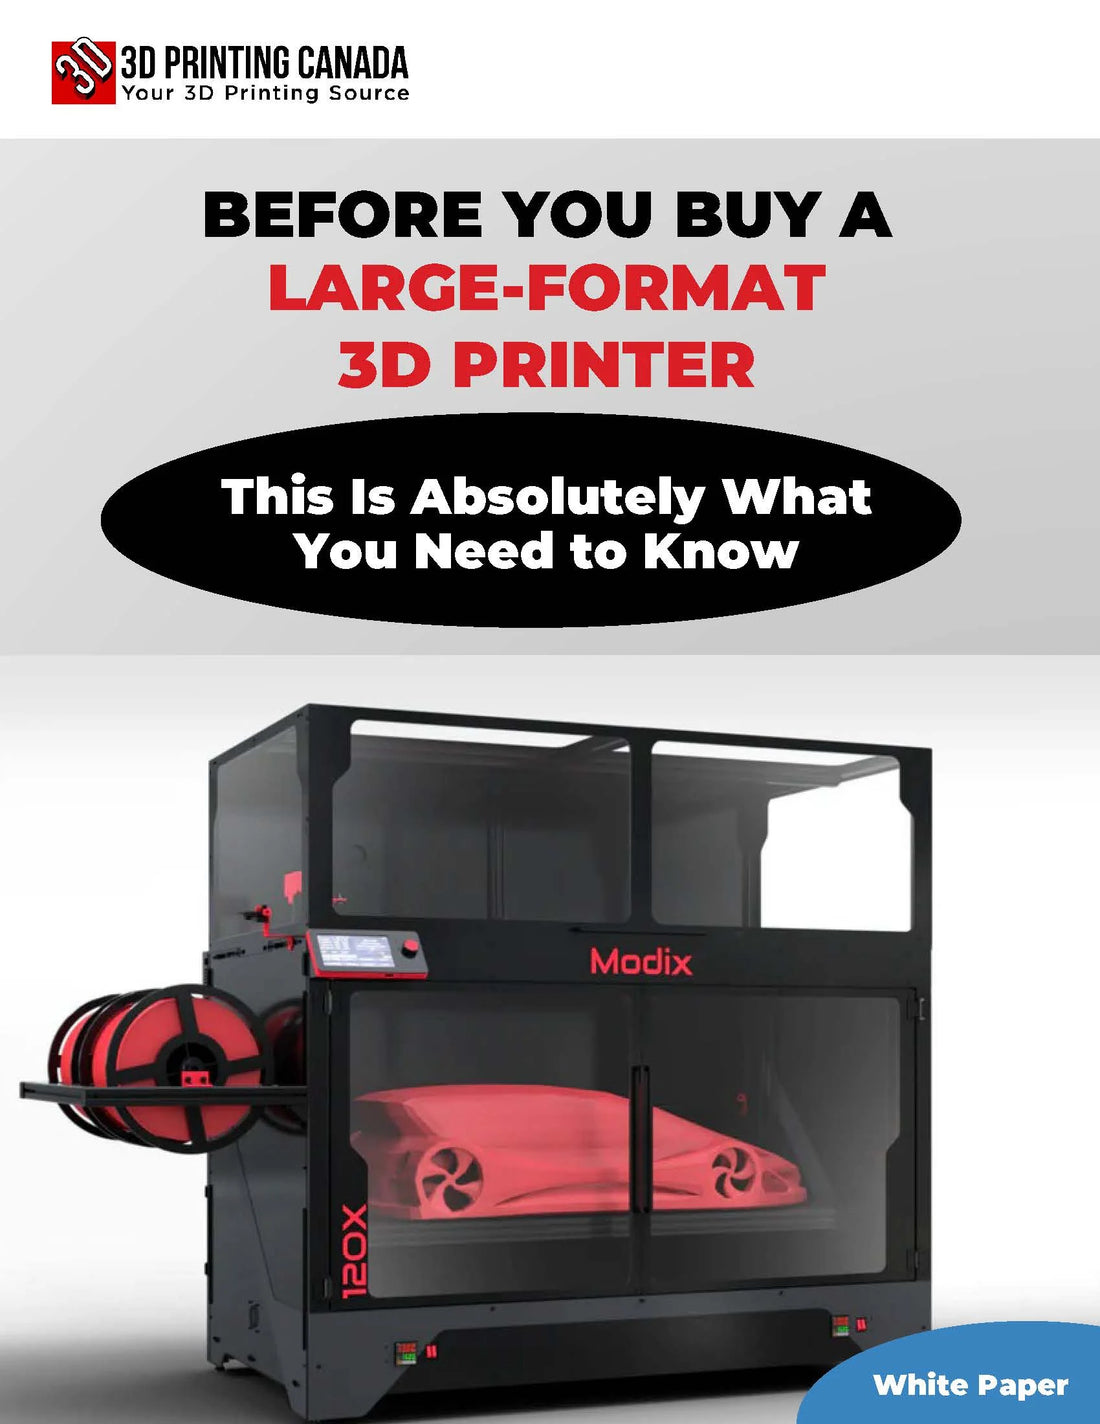 Whitepaper: Before You Buy A Large-Format 3D Printer